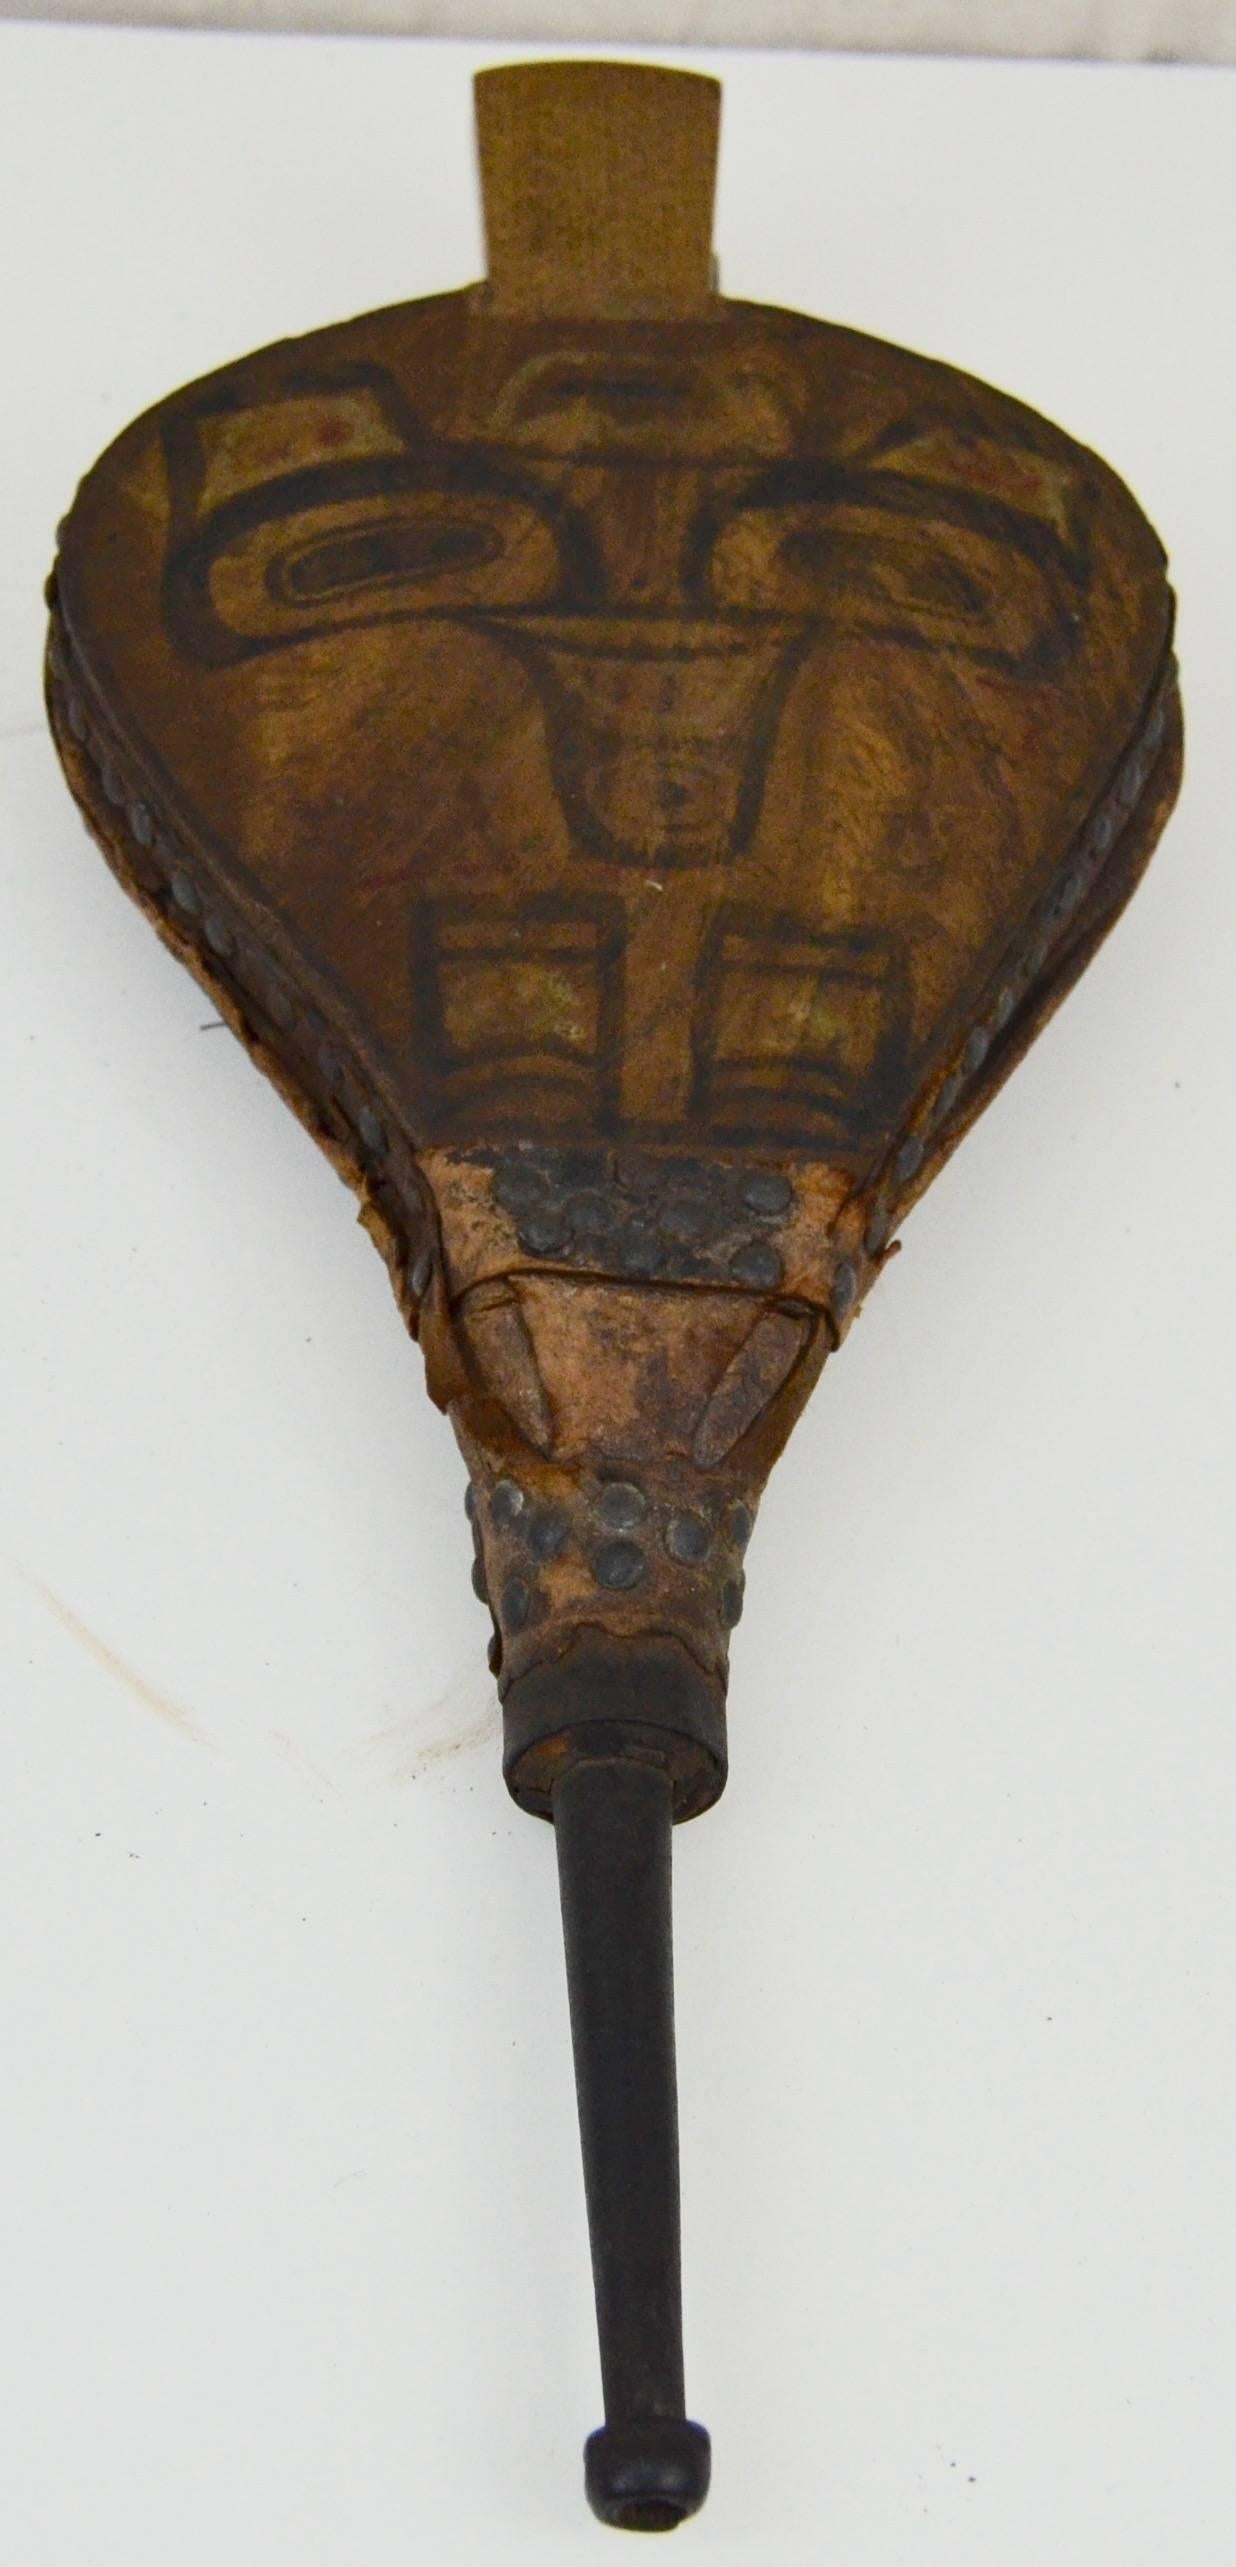 Pair of bellows with images of a bear on on side and a shaman on the other. Used as a part of a whistle. Most likely from the Charlotte Islands.